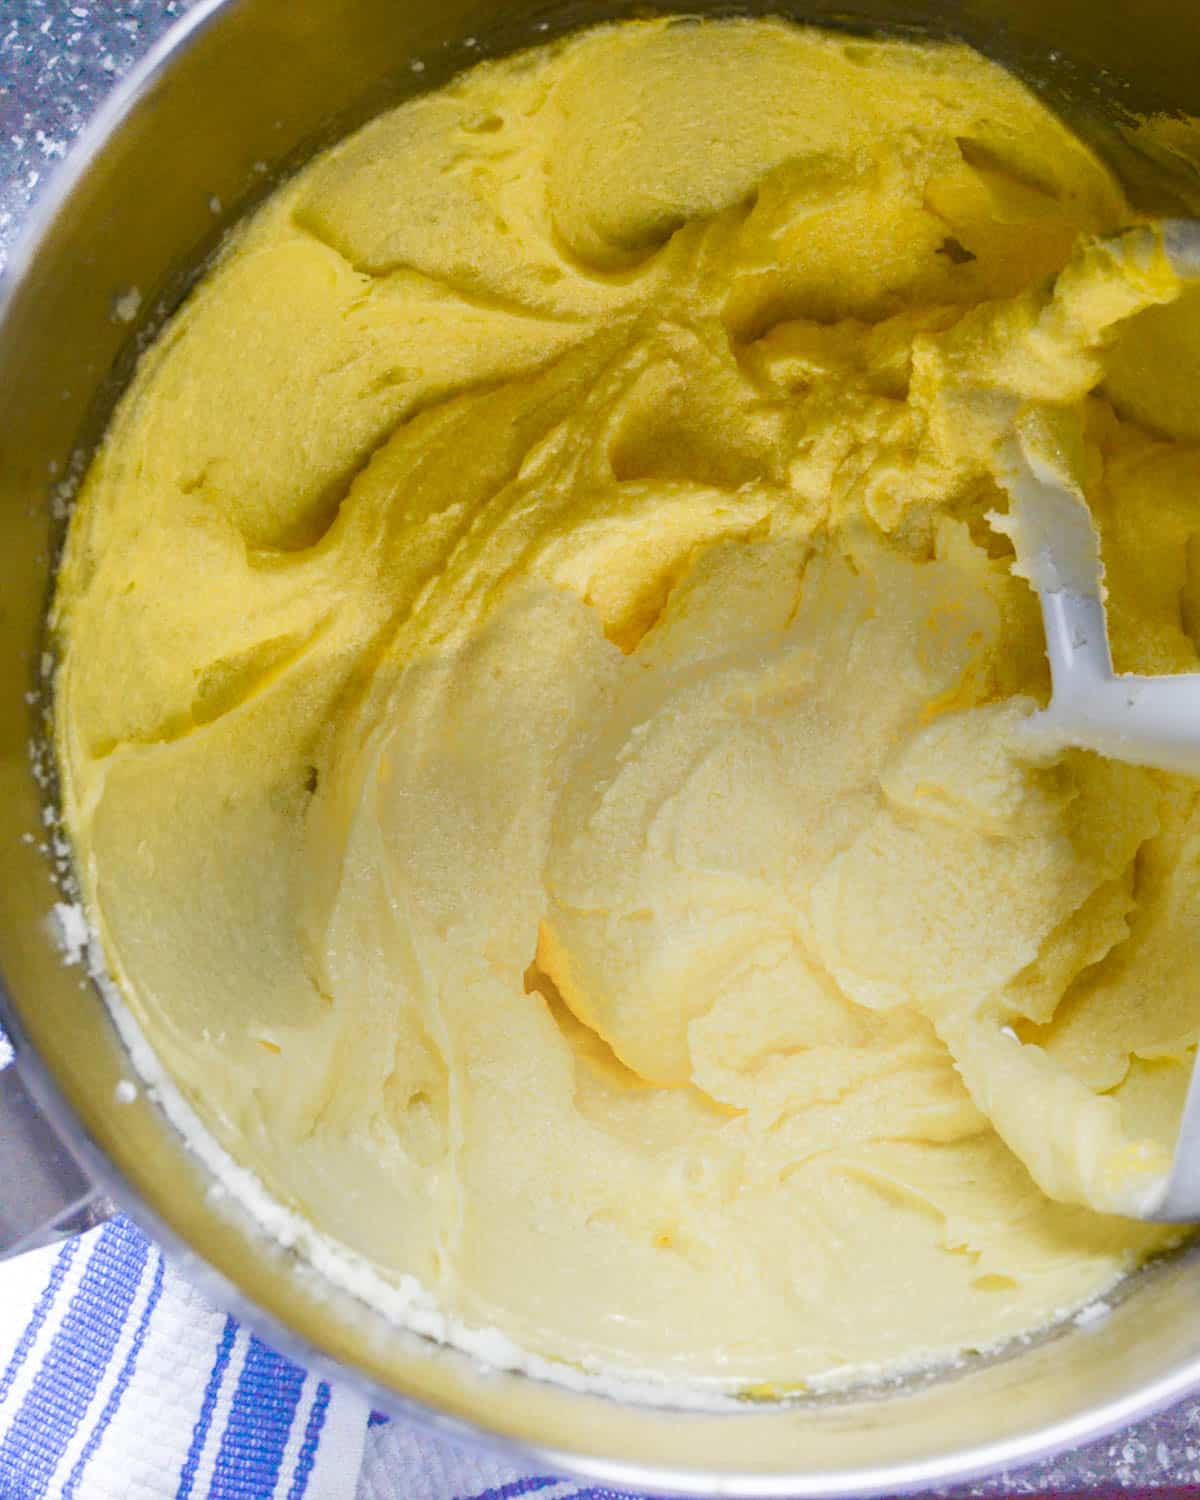 The creamed sugar, butter and eggs are smooth and creamy.